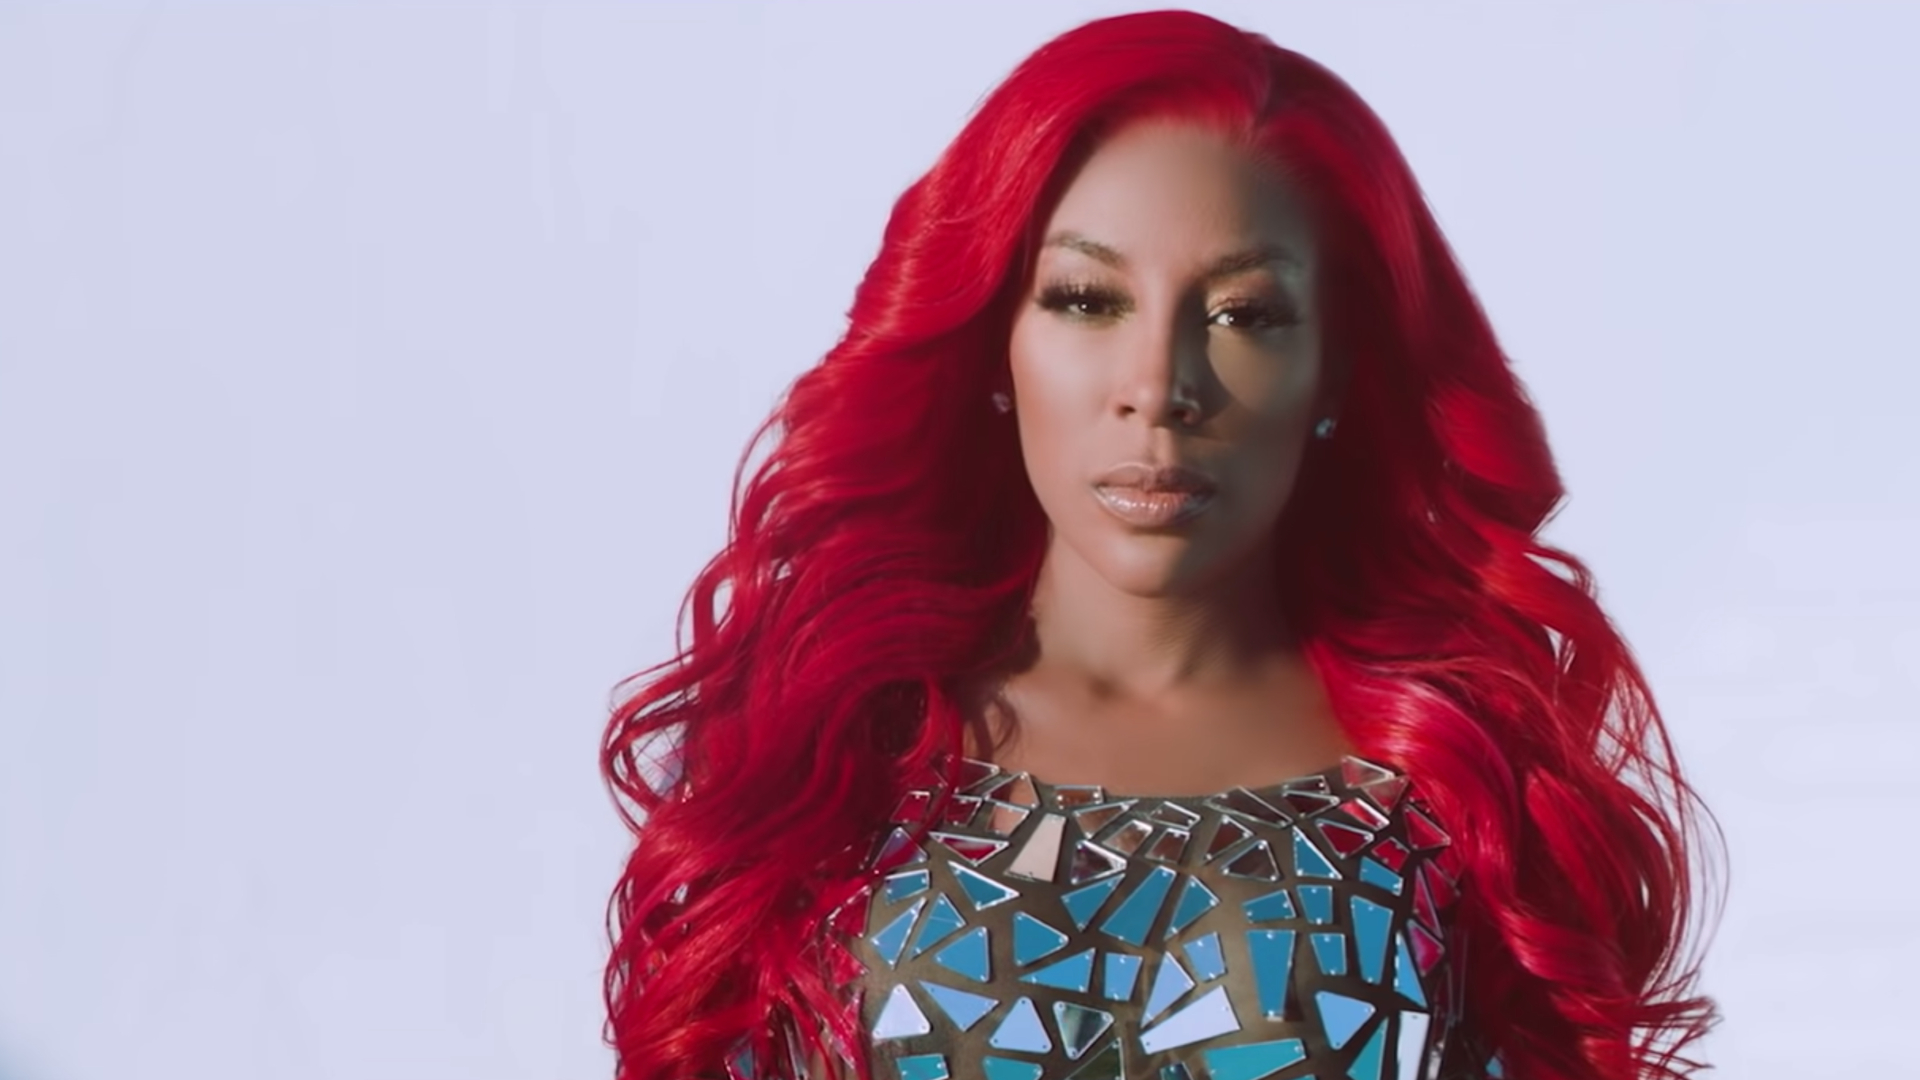 Who Is K Michelle, The Singer?